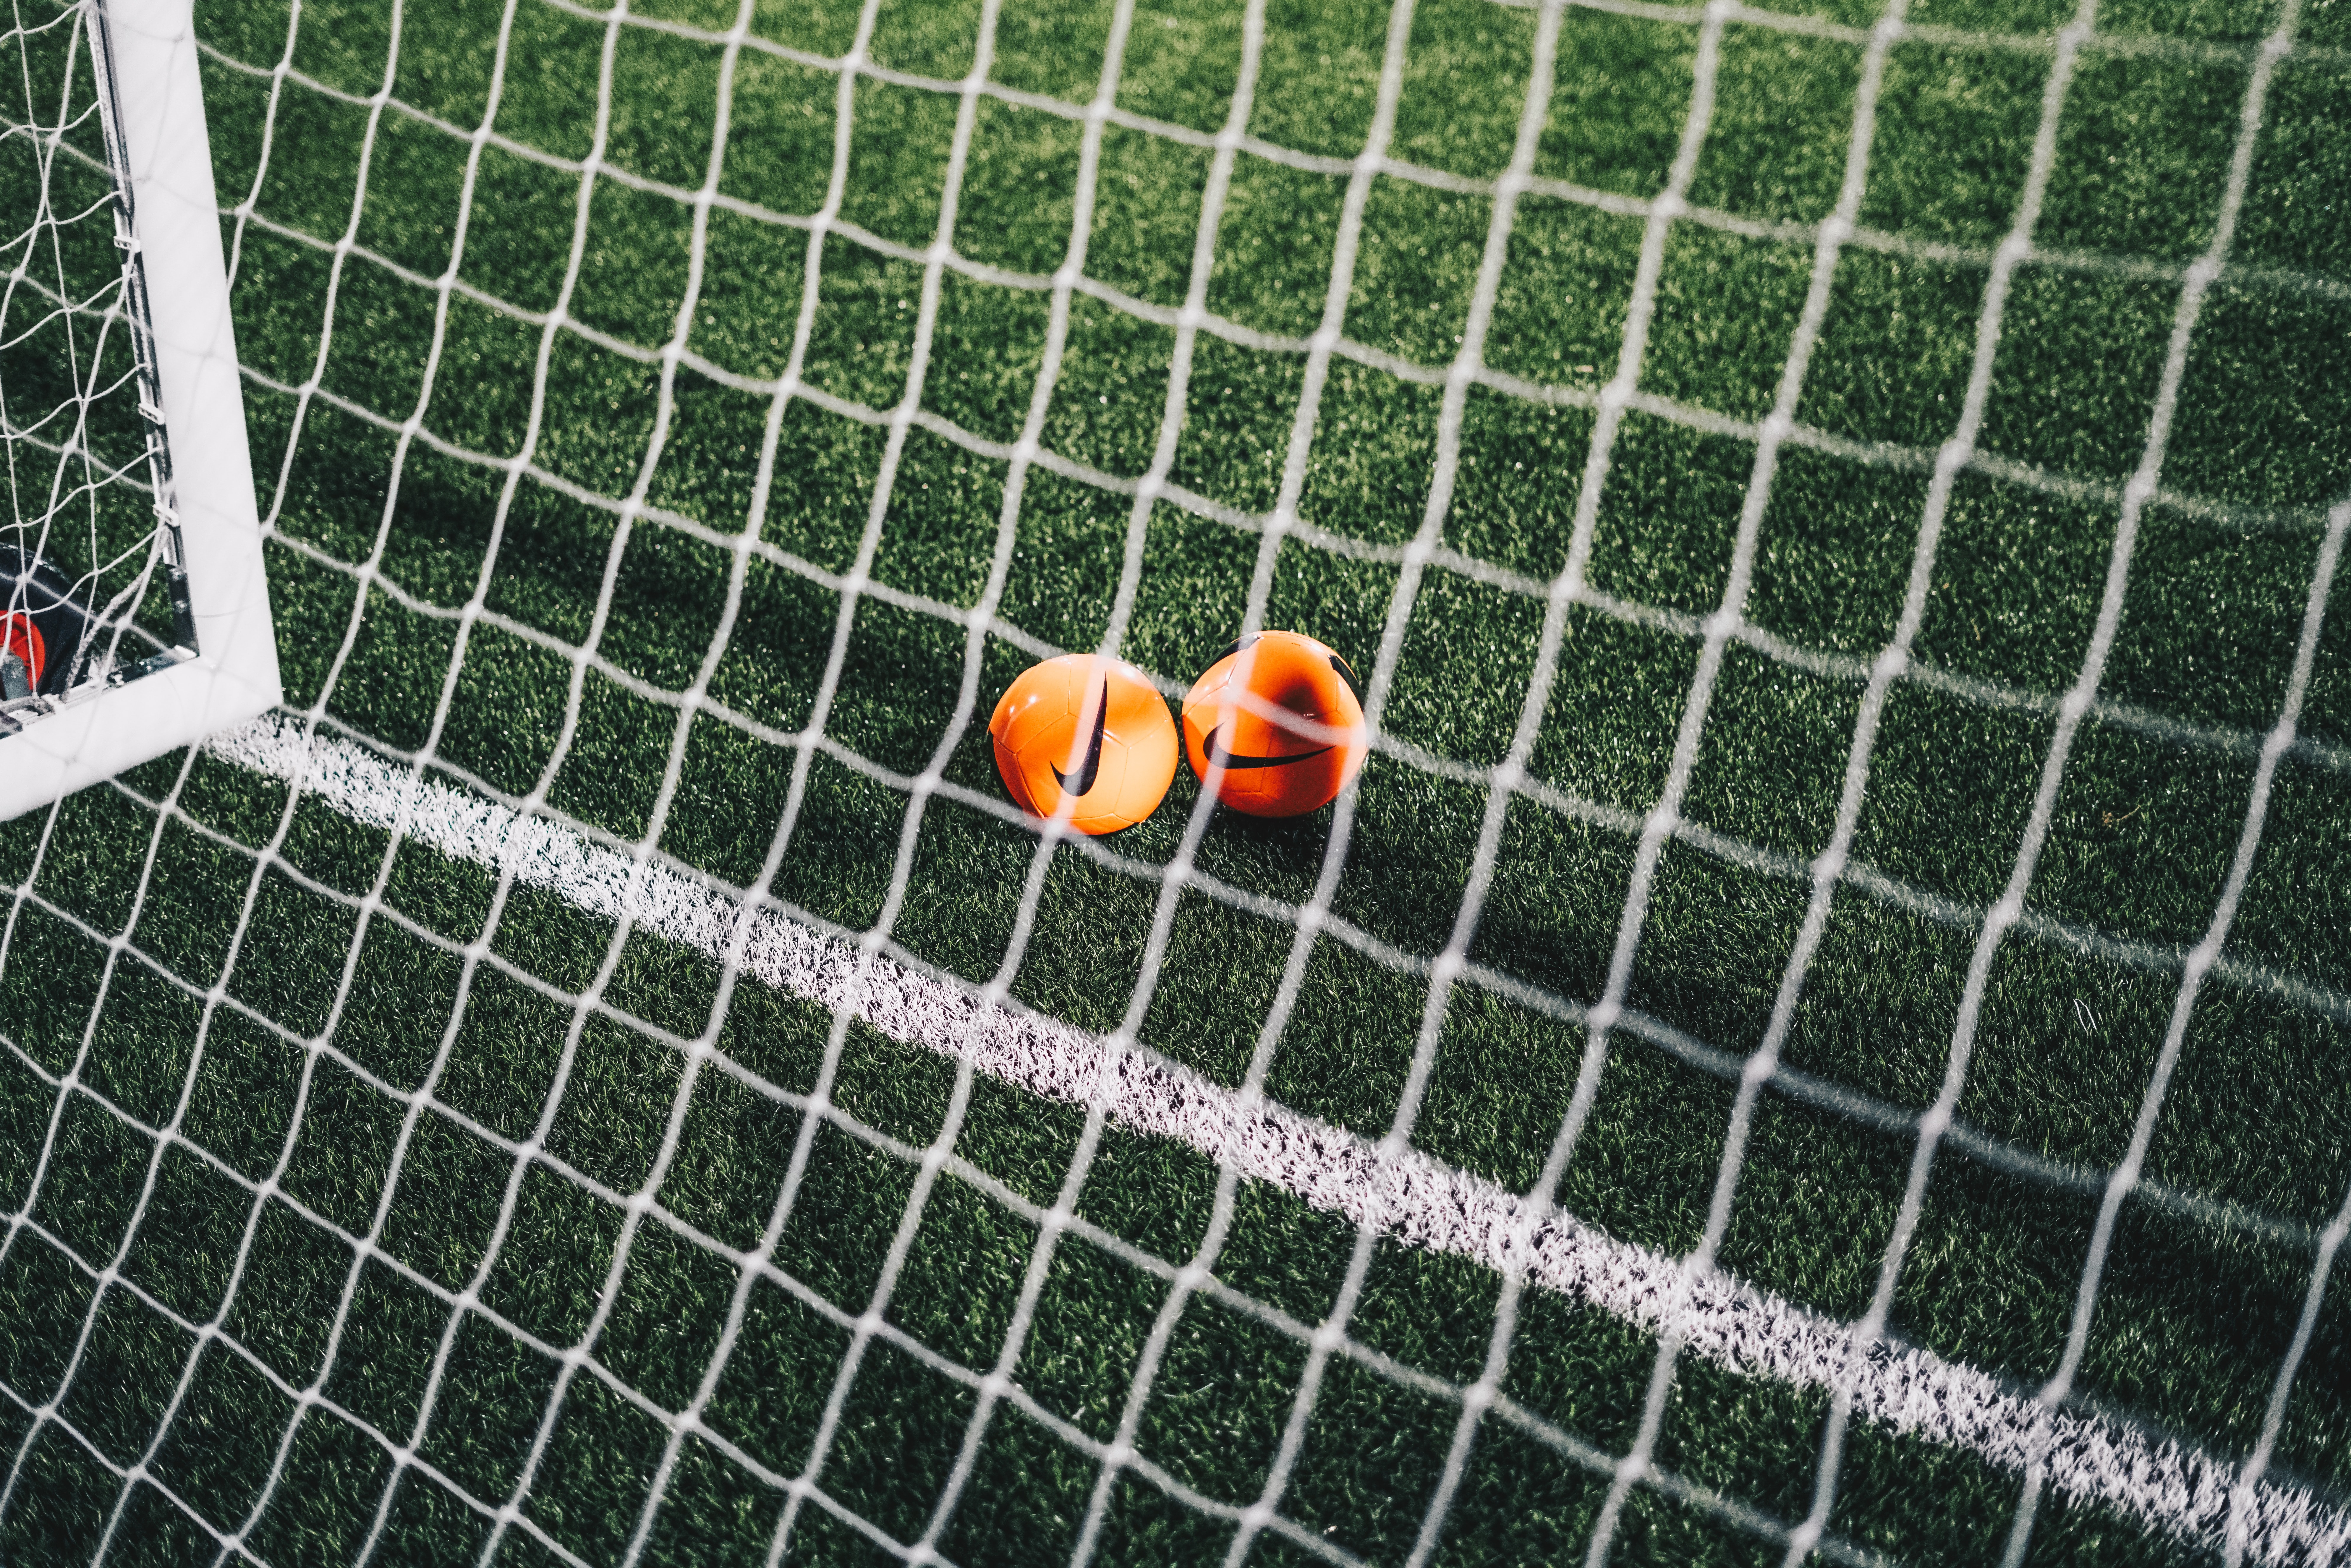 123198 download wallpaper football, sports, grid, balls, football field, gate, goal screensavers and pictures for free